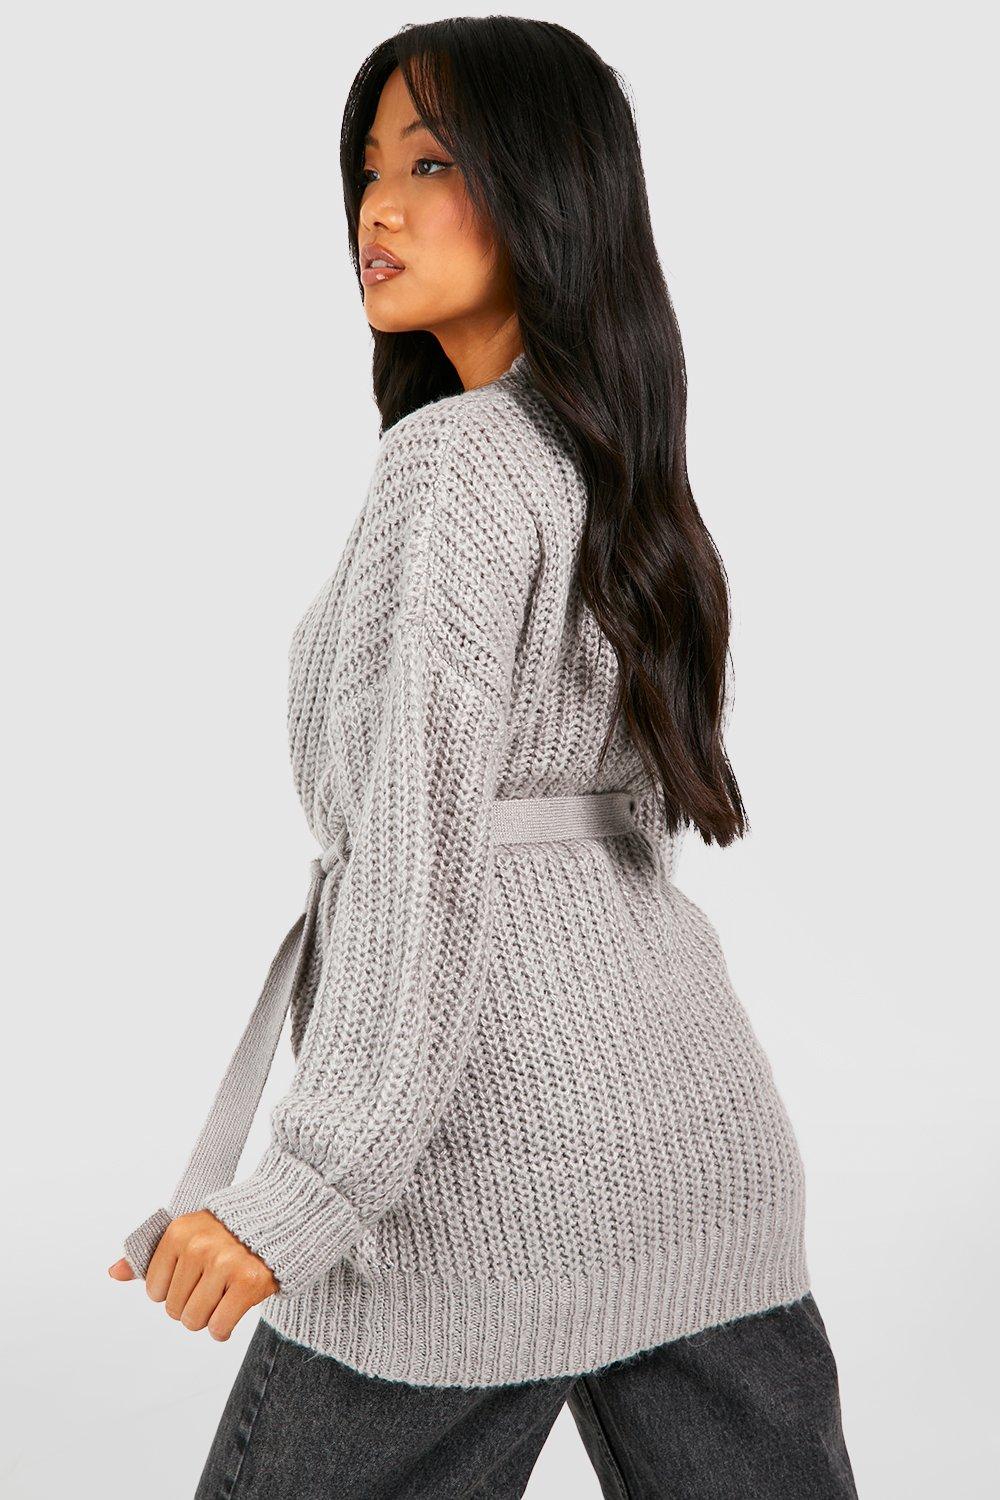 Chaï Cardigan We Are Knitters, 56% OFF | dr.ig.com.br